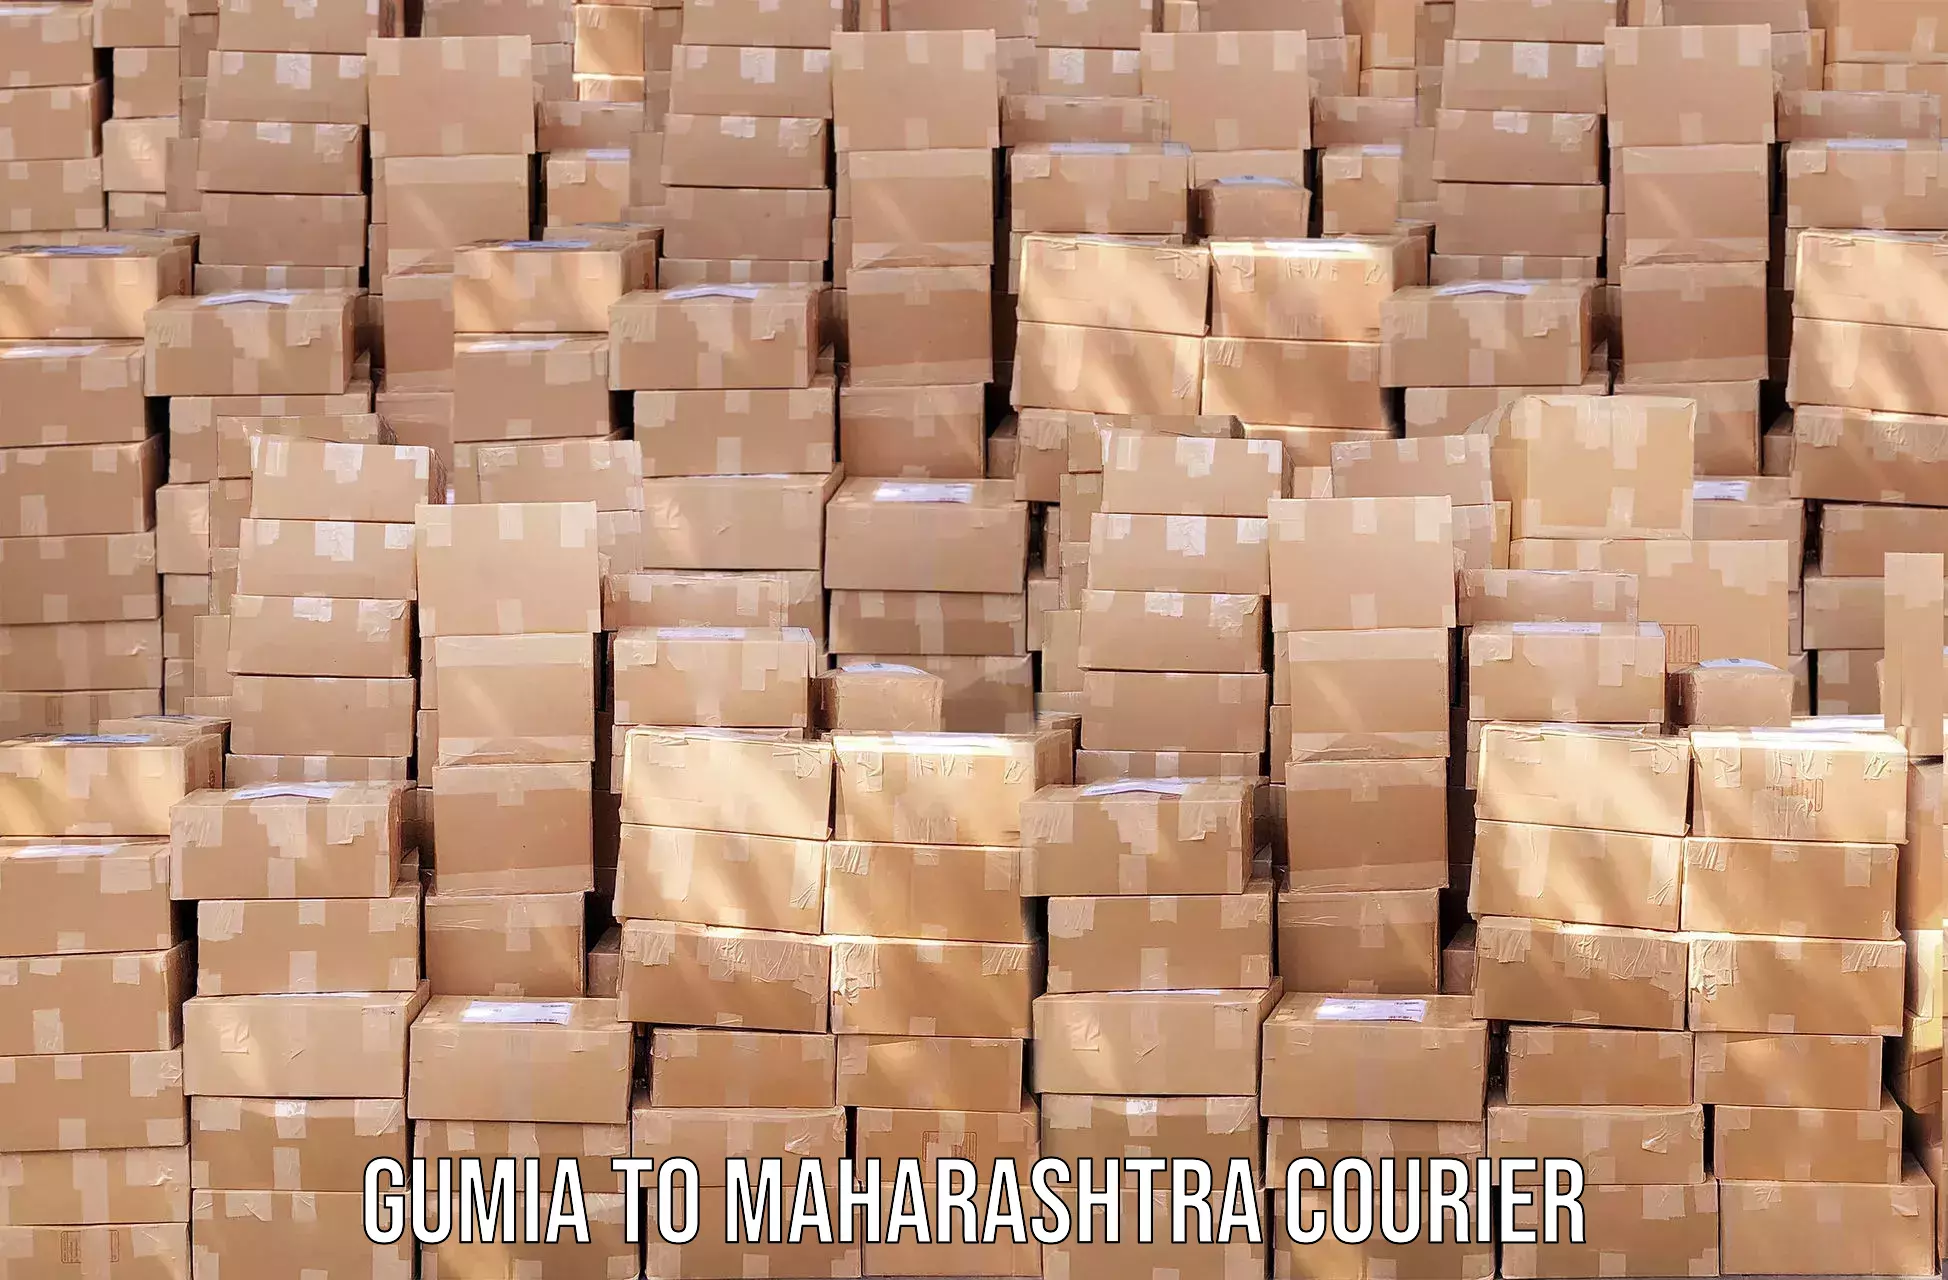 Multi-service courier options in Gumia to Maharashtra